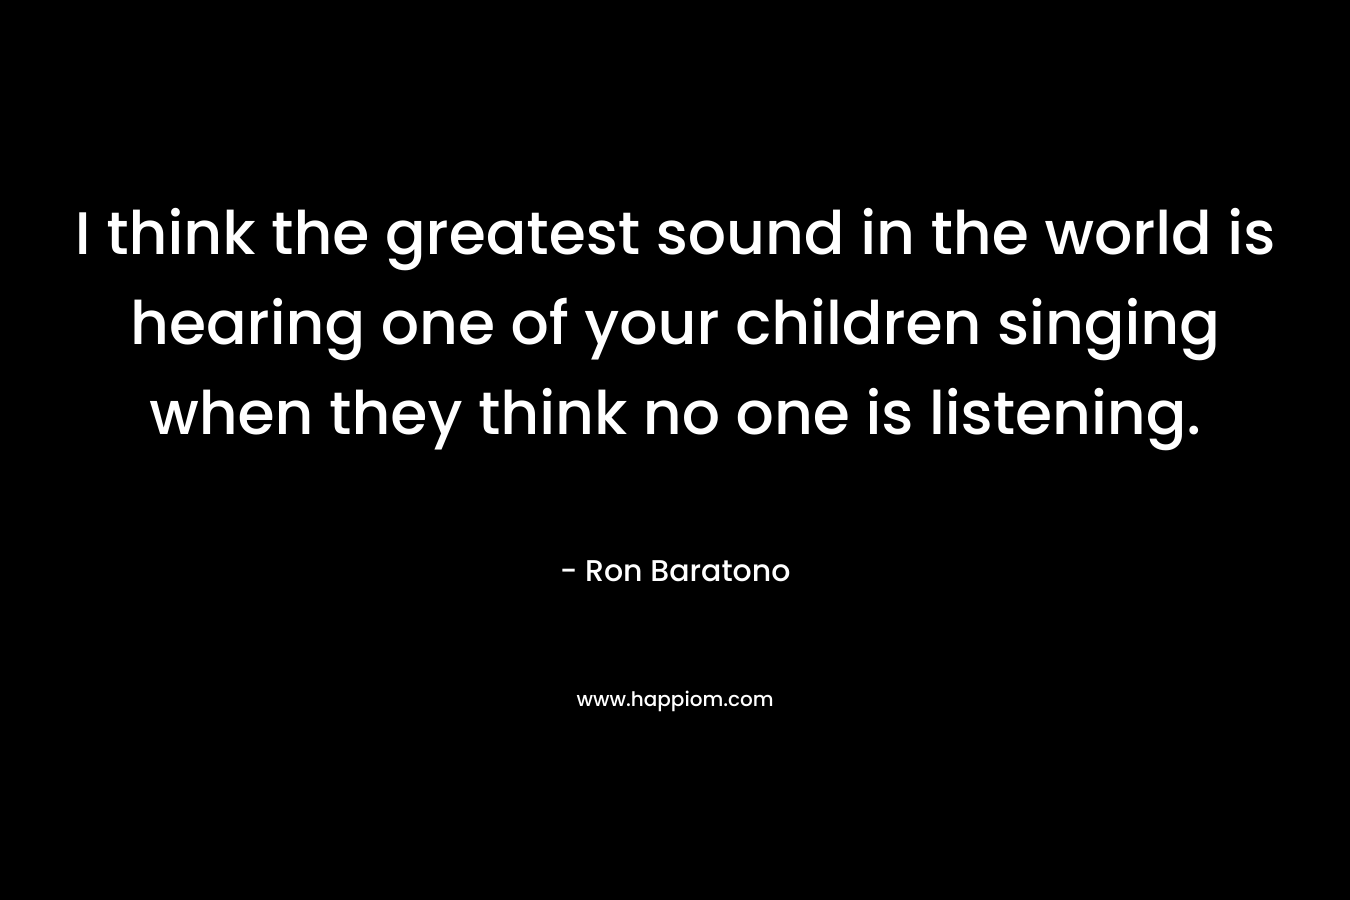 I think the greatest sound in the world is hearing one of your children singing when they think no one is listening. – Ron Baratono